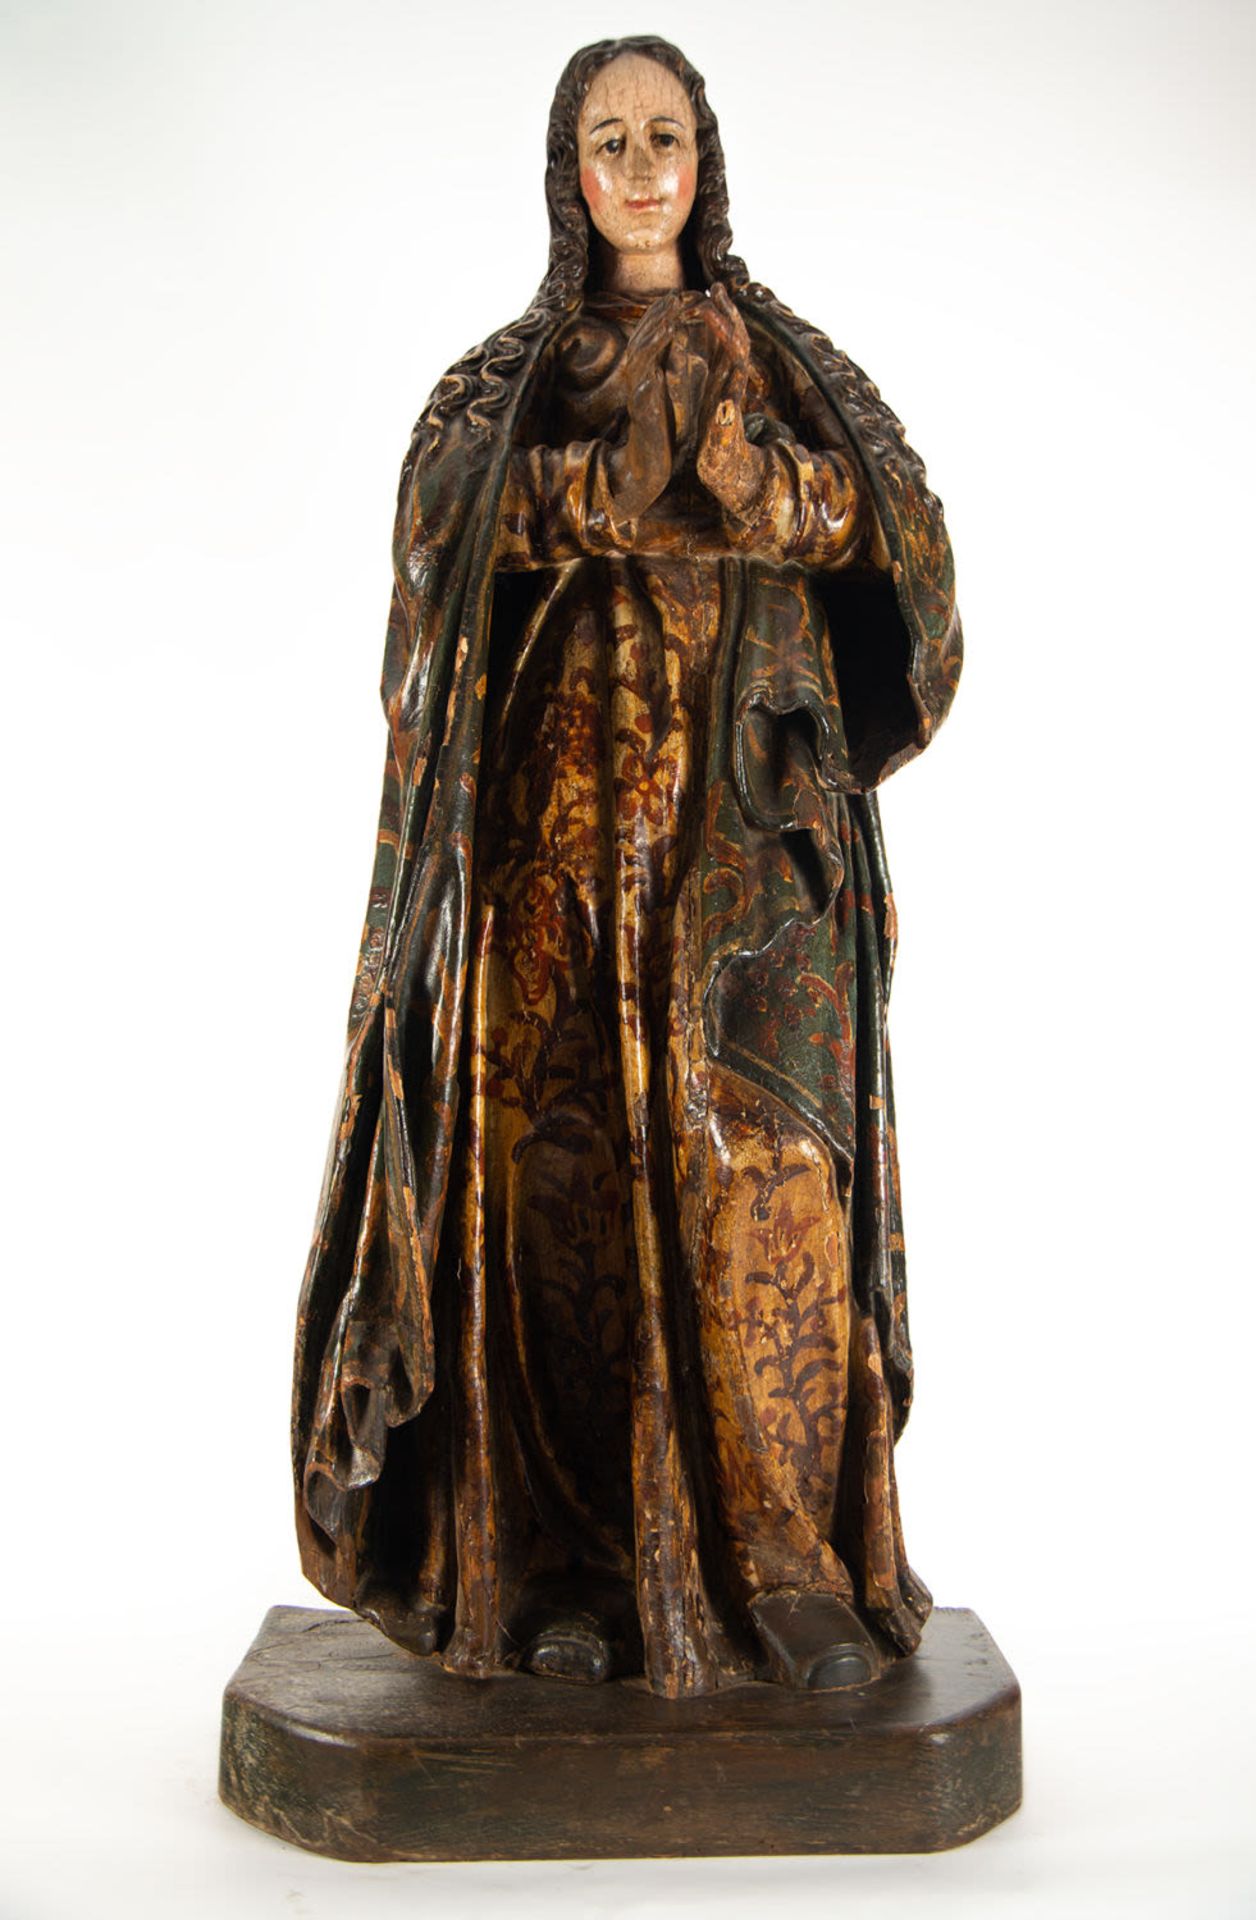 Great Immaculate Virgin, 17th century, possibly Cuzco, 17th century Cuzco colonial school